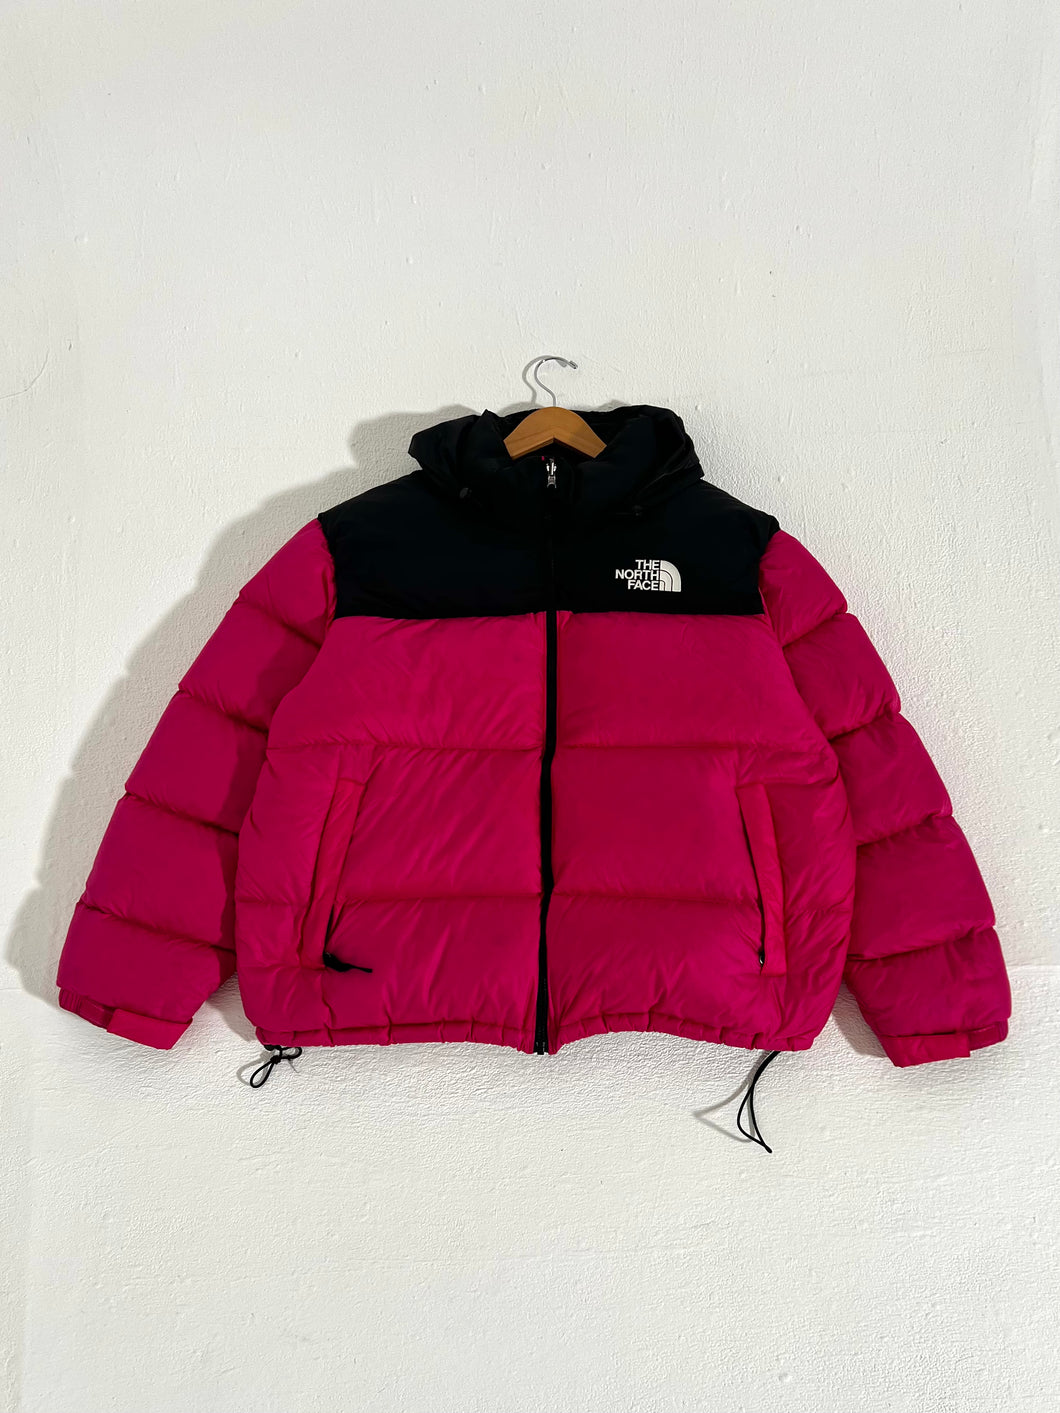 The North Face Black/Pink Puffer Jacket Sz. XXL